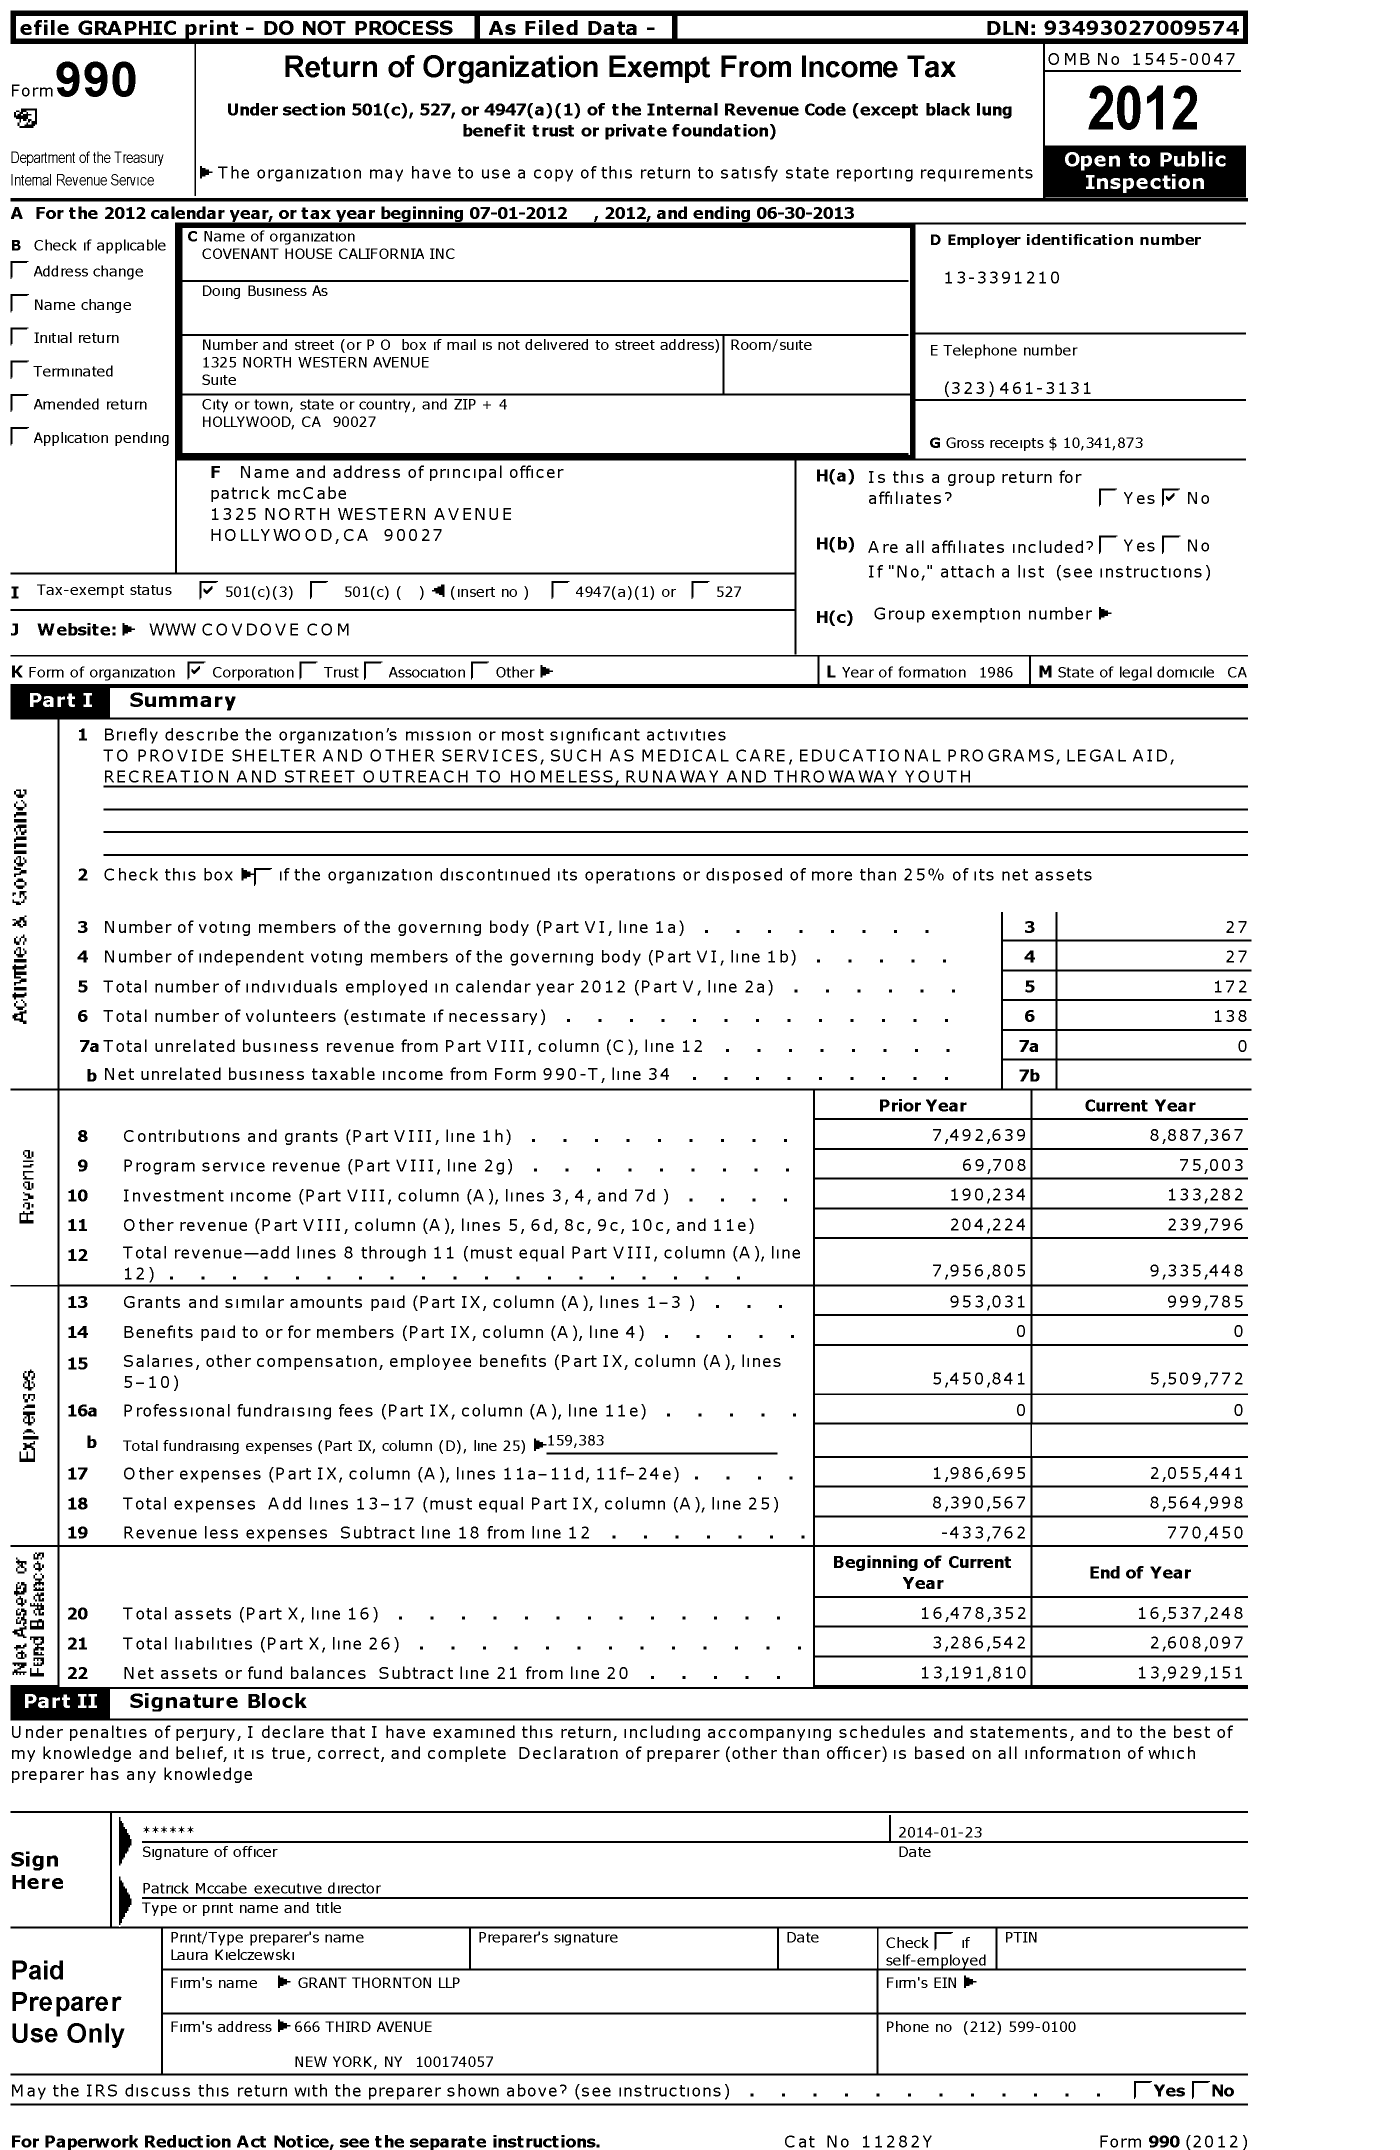 Image of first page of 2012 Form 990 for Covenant house California